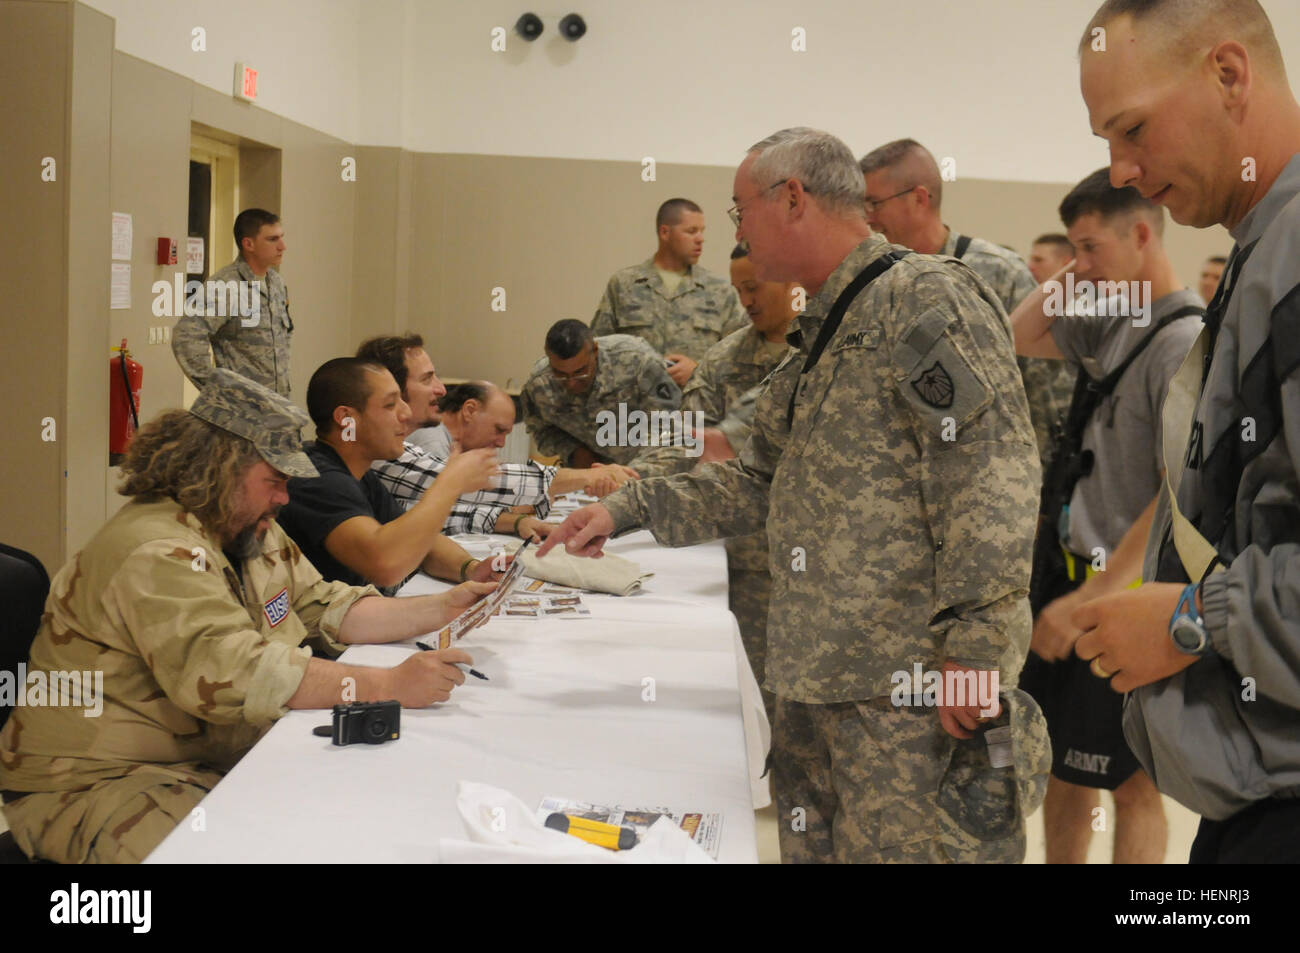 Cast members of the FX show 'Sons of Anarchy' sign autographs for service members during a meet and greet, March 16, at Joint Base Balad, Iraq. Sons of Anarchy actors 4 Stock Photo